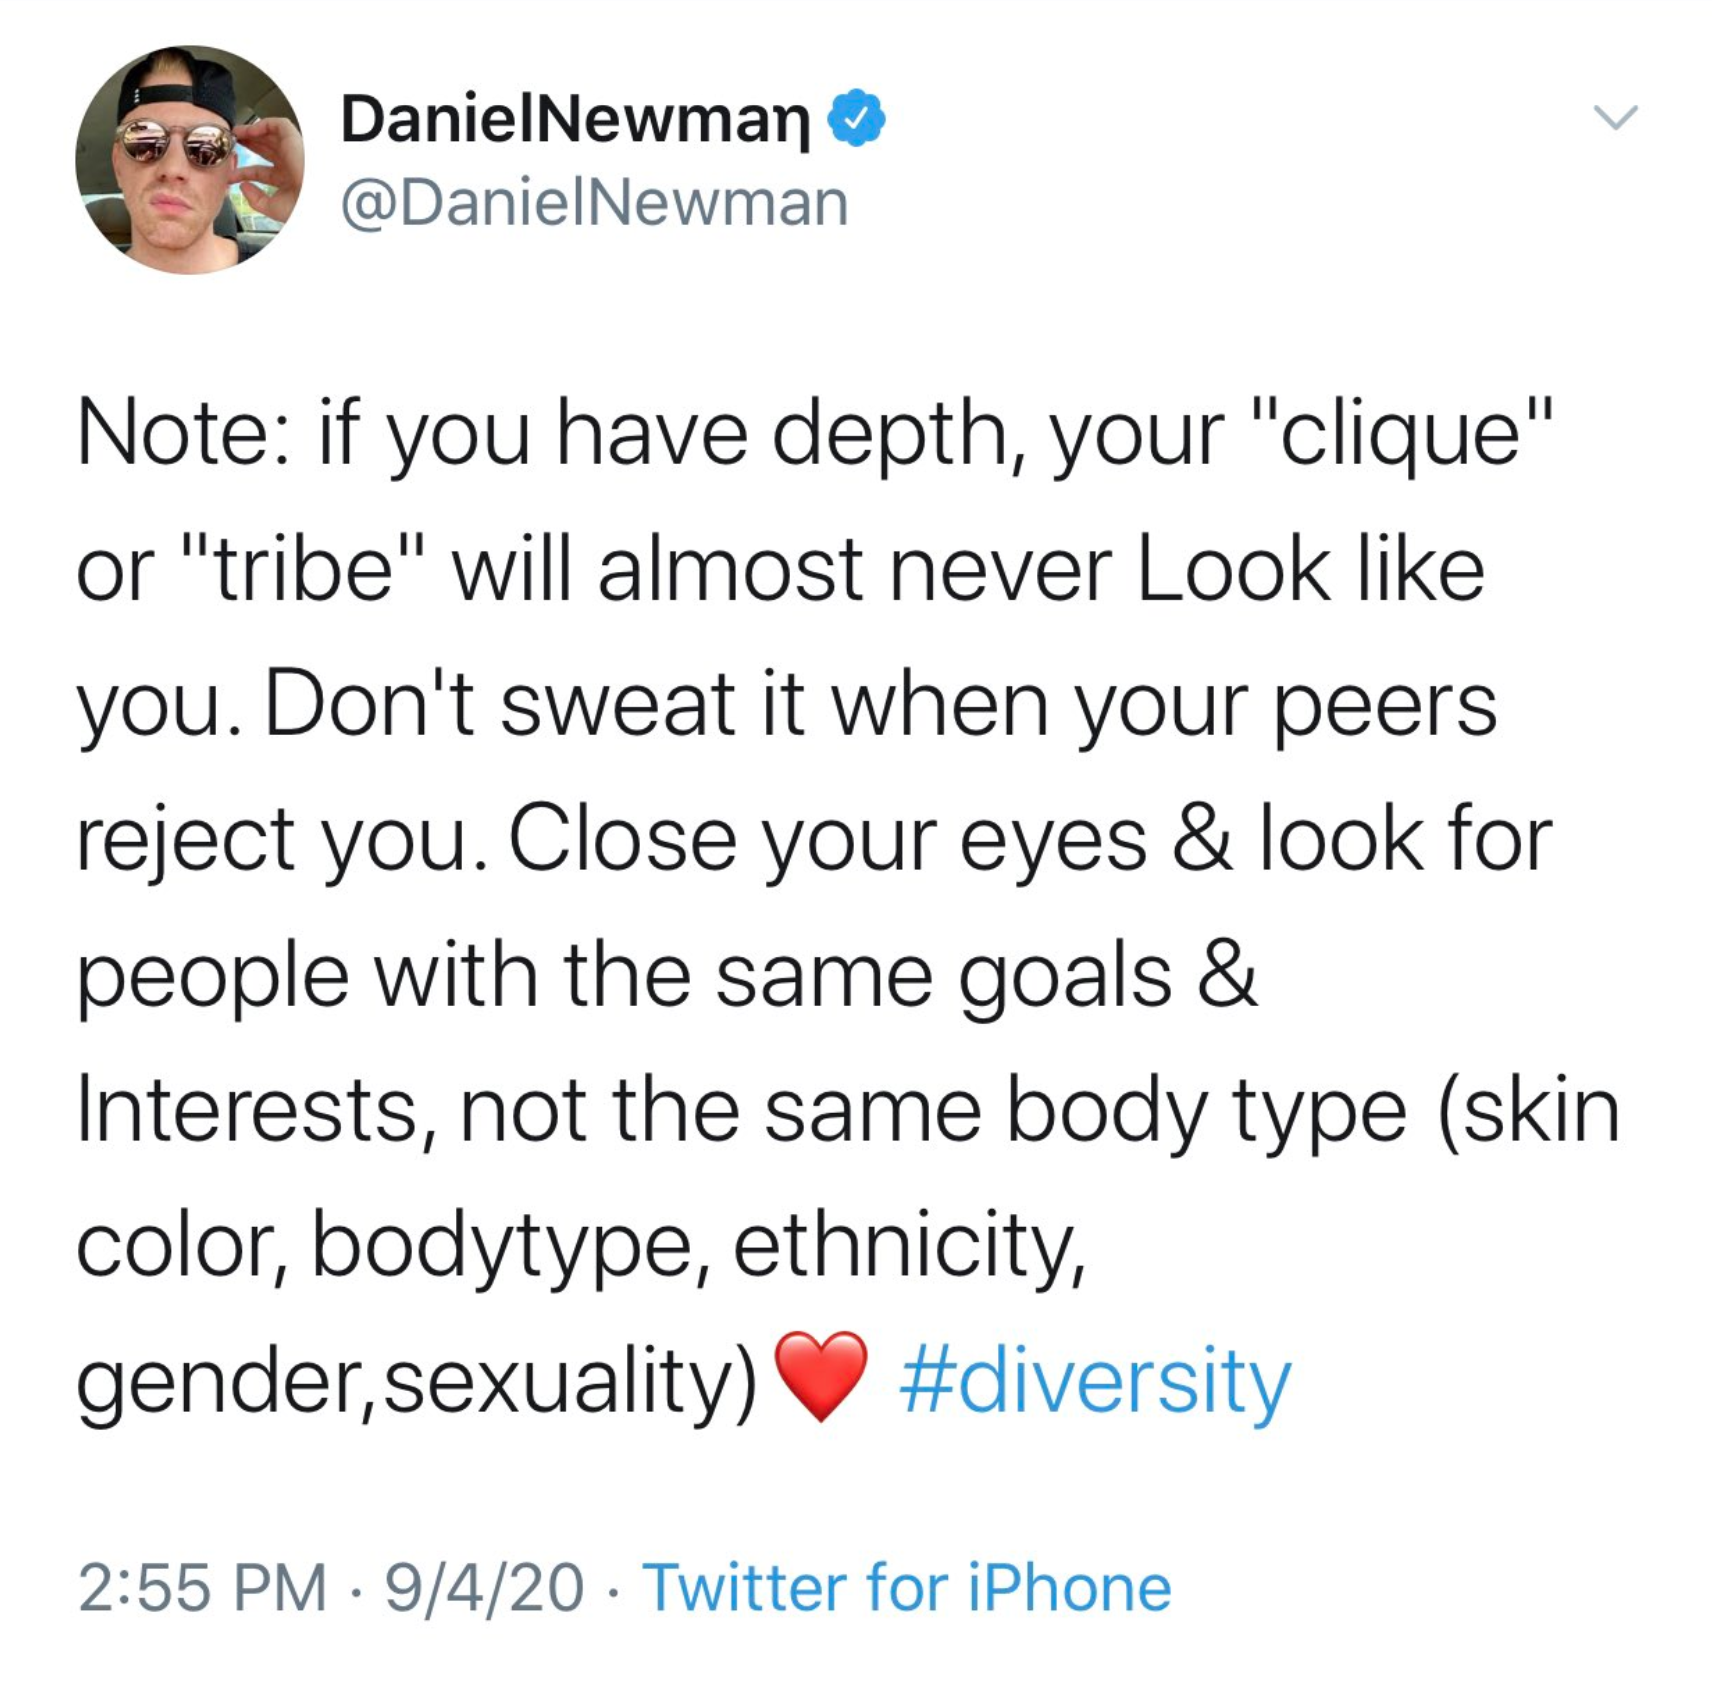 aluko tweets furlough - DanielNewman Note if you have depth, your "clique" or "tribe" will almost never Look you. Don't sweat it when your peers reject you. Close your eyes & look for people with the same goals & Interests, not the same body type skin col